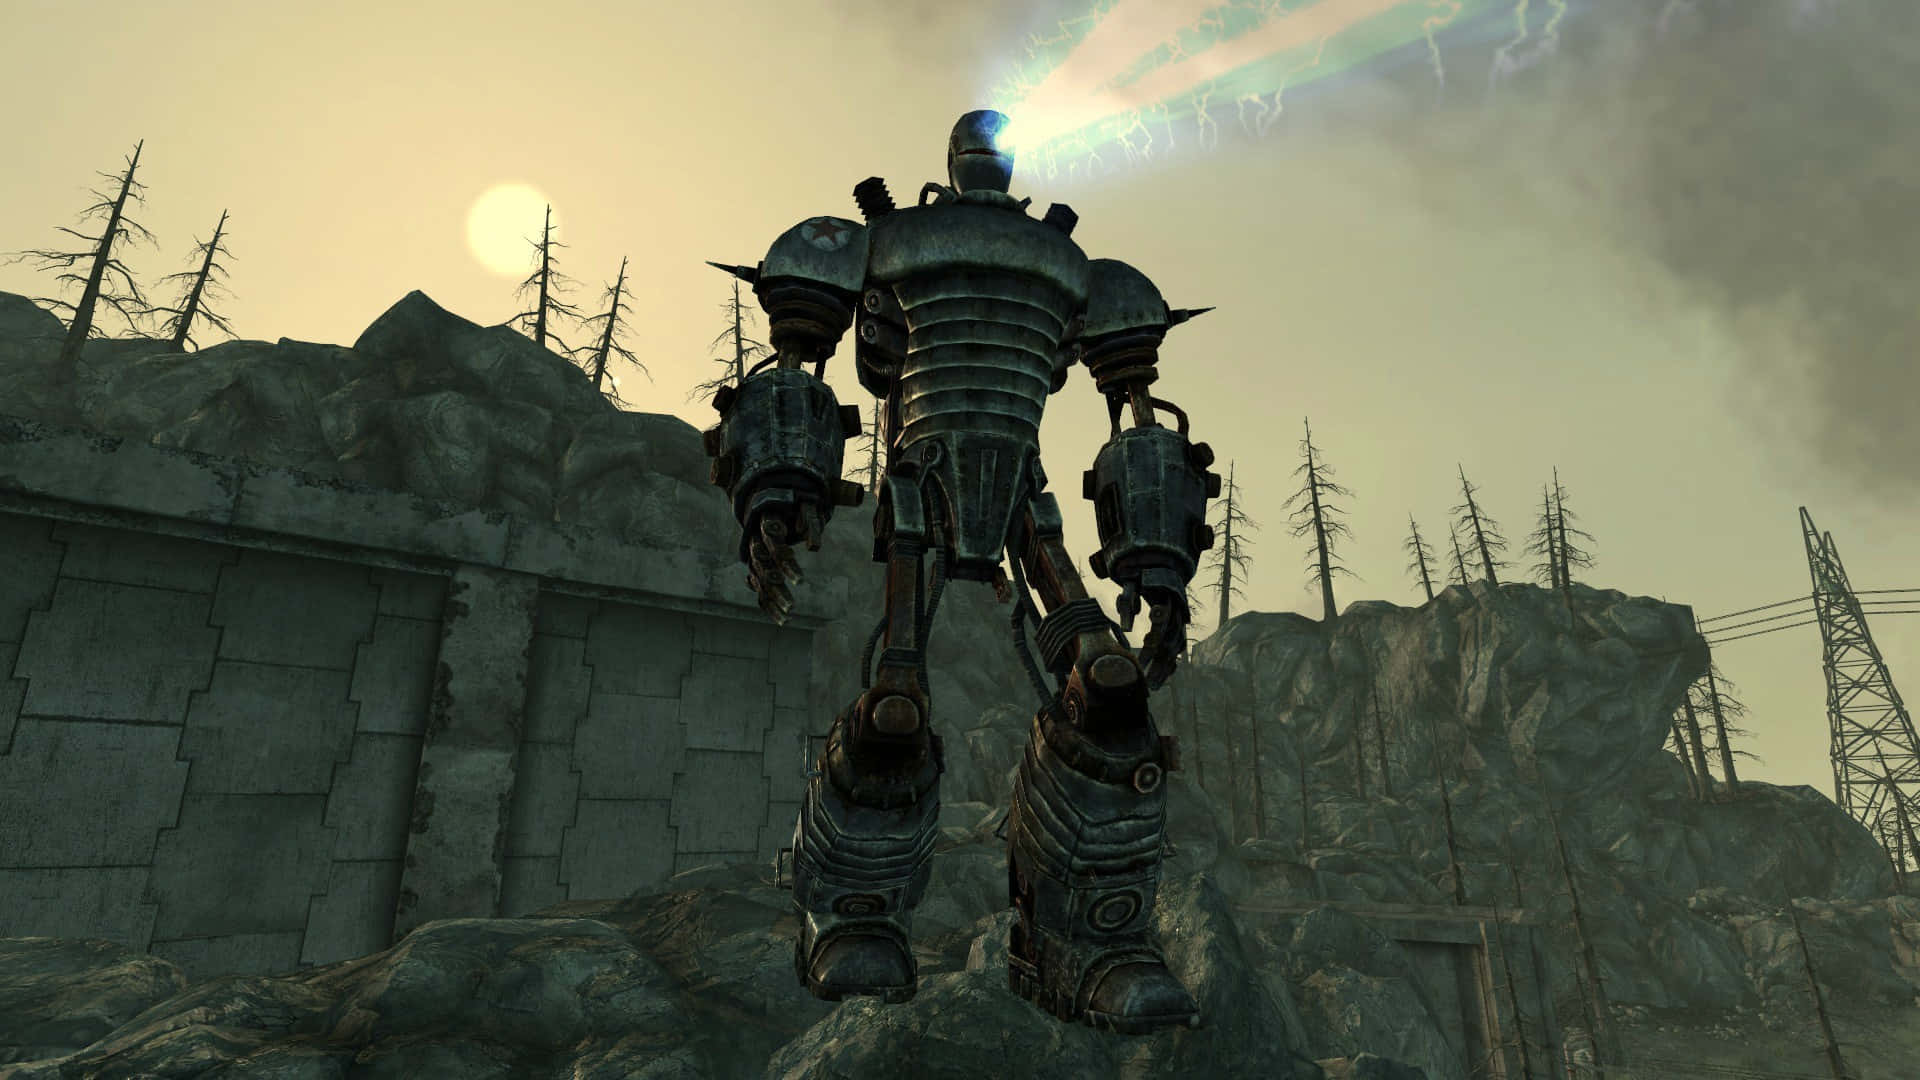 Liberty Prime, a symbol of power and freedom, standing tall against the backdrop of a post-apocalyptic world. Wallpaper